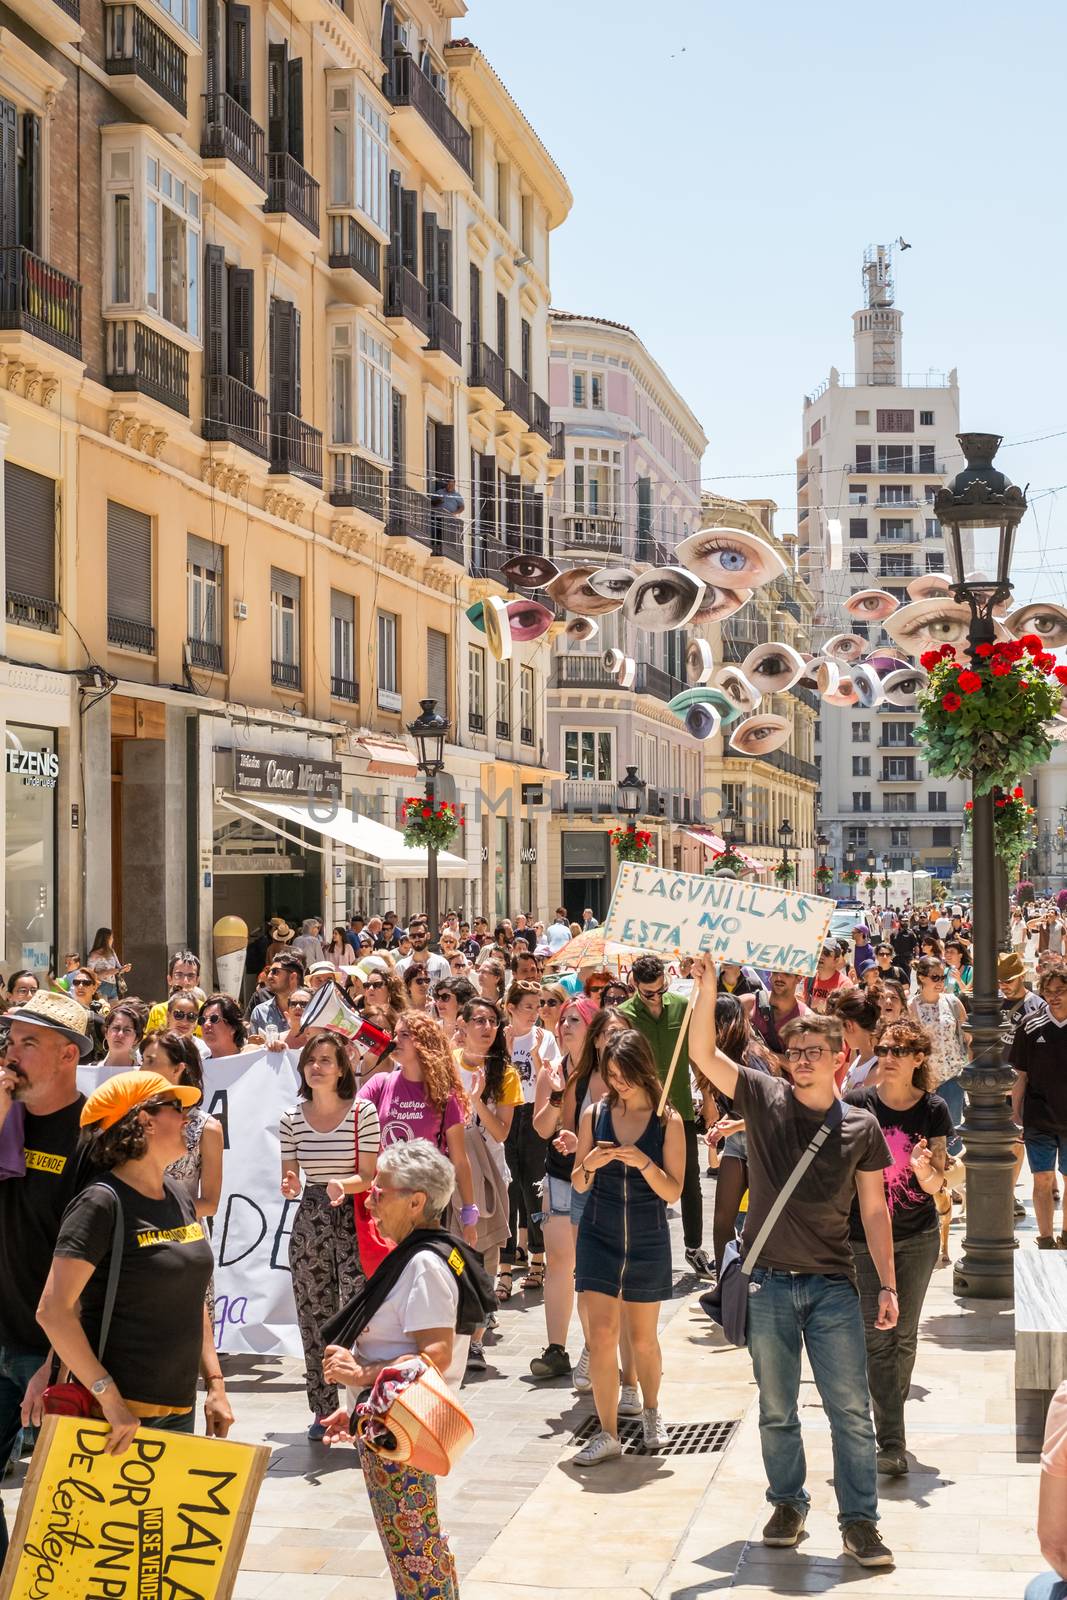 Malaga, Spain - May 12, 2018. People members of the Malaga No Se Vende platform, manifesting on the Marques de Larios pedestrian, in the historic center of Malaga, Spain